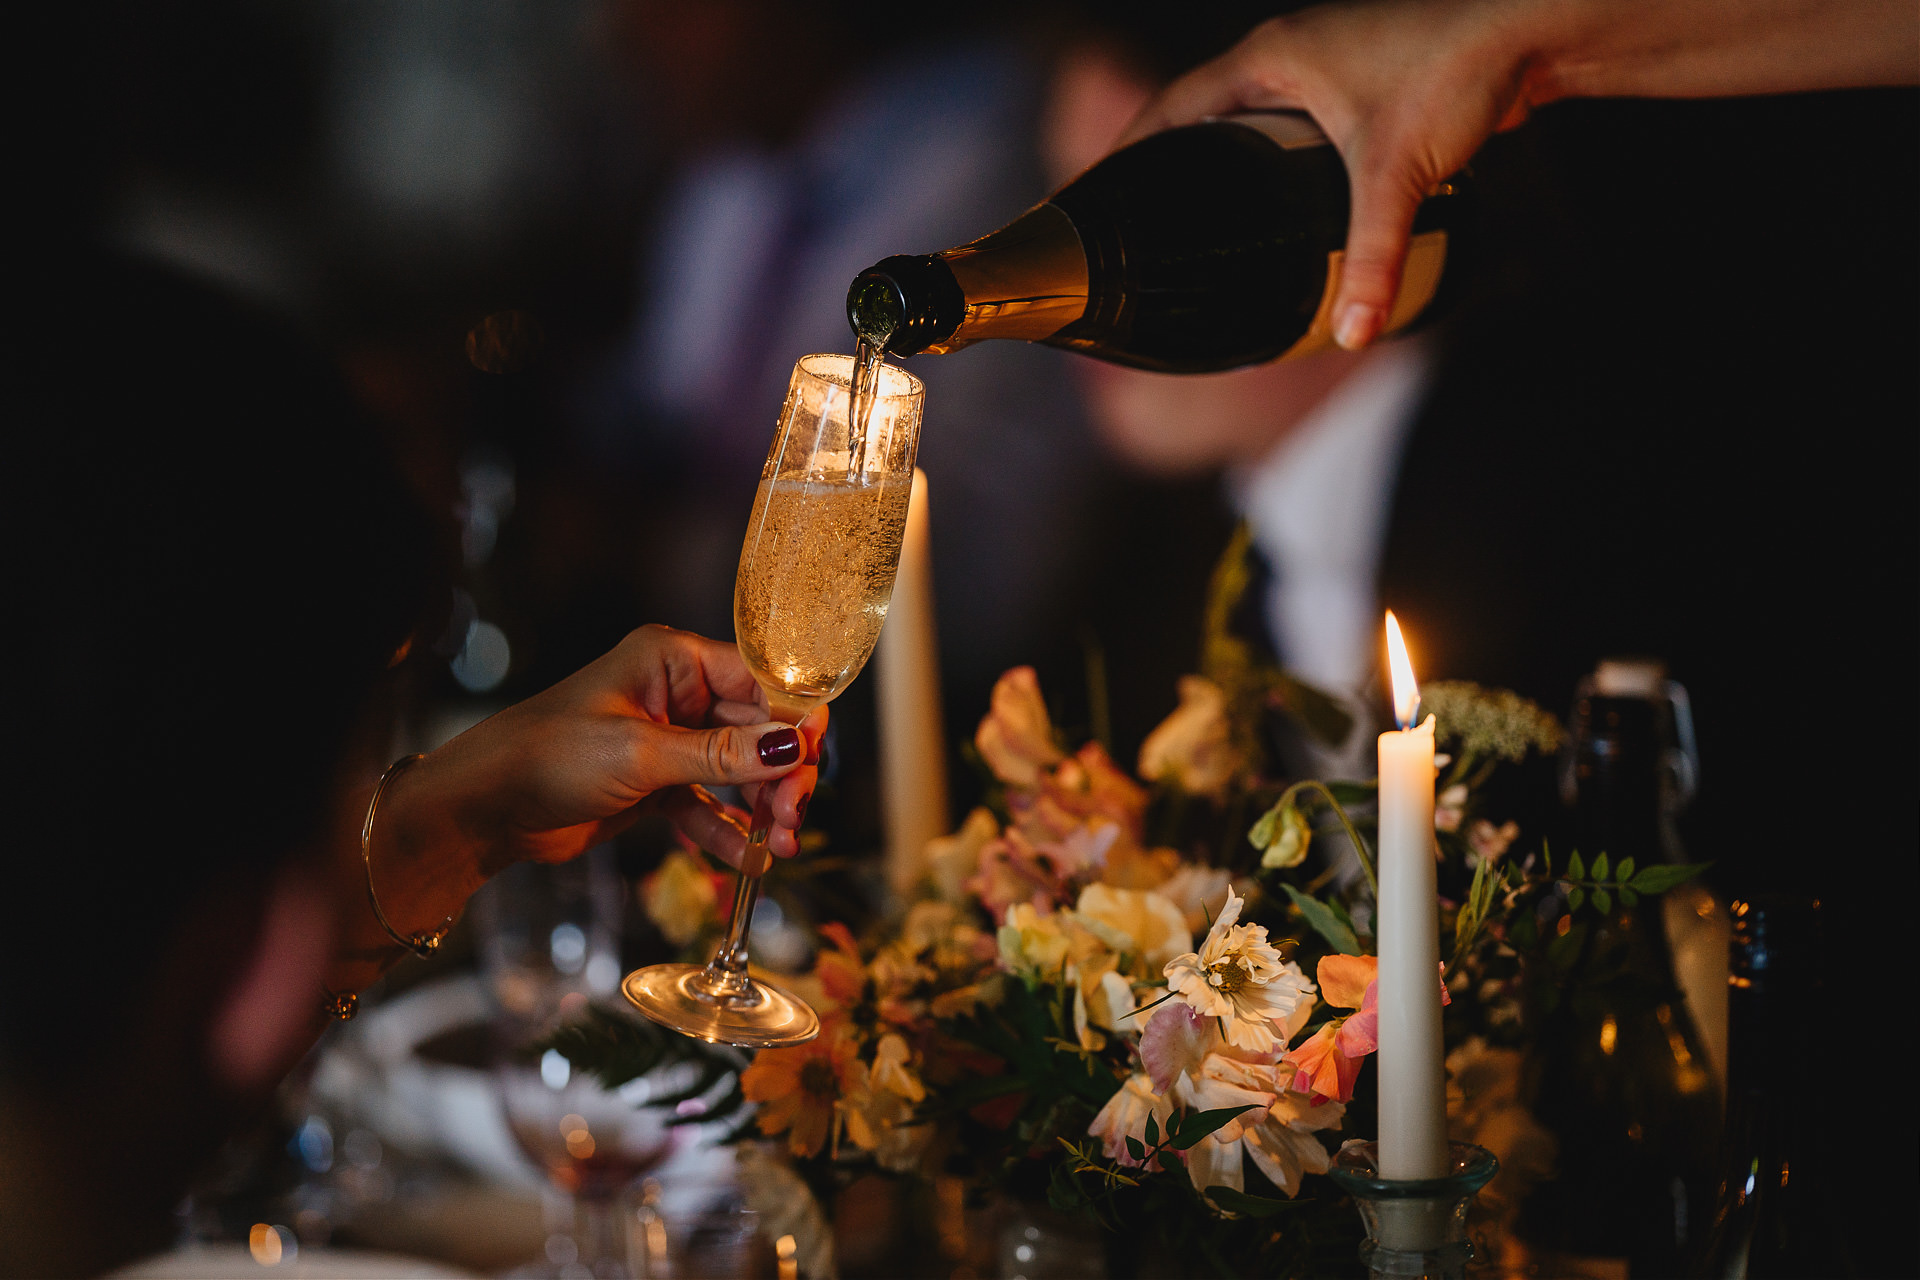 Champagne being poured into a glass in a dark barn with candles lit